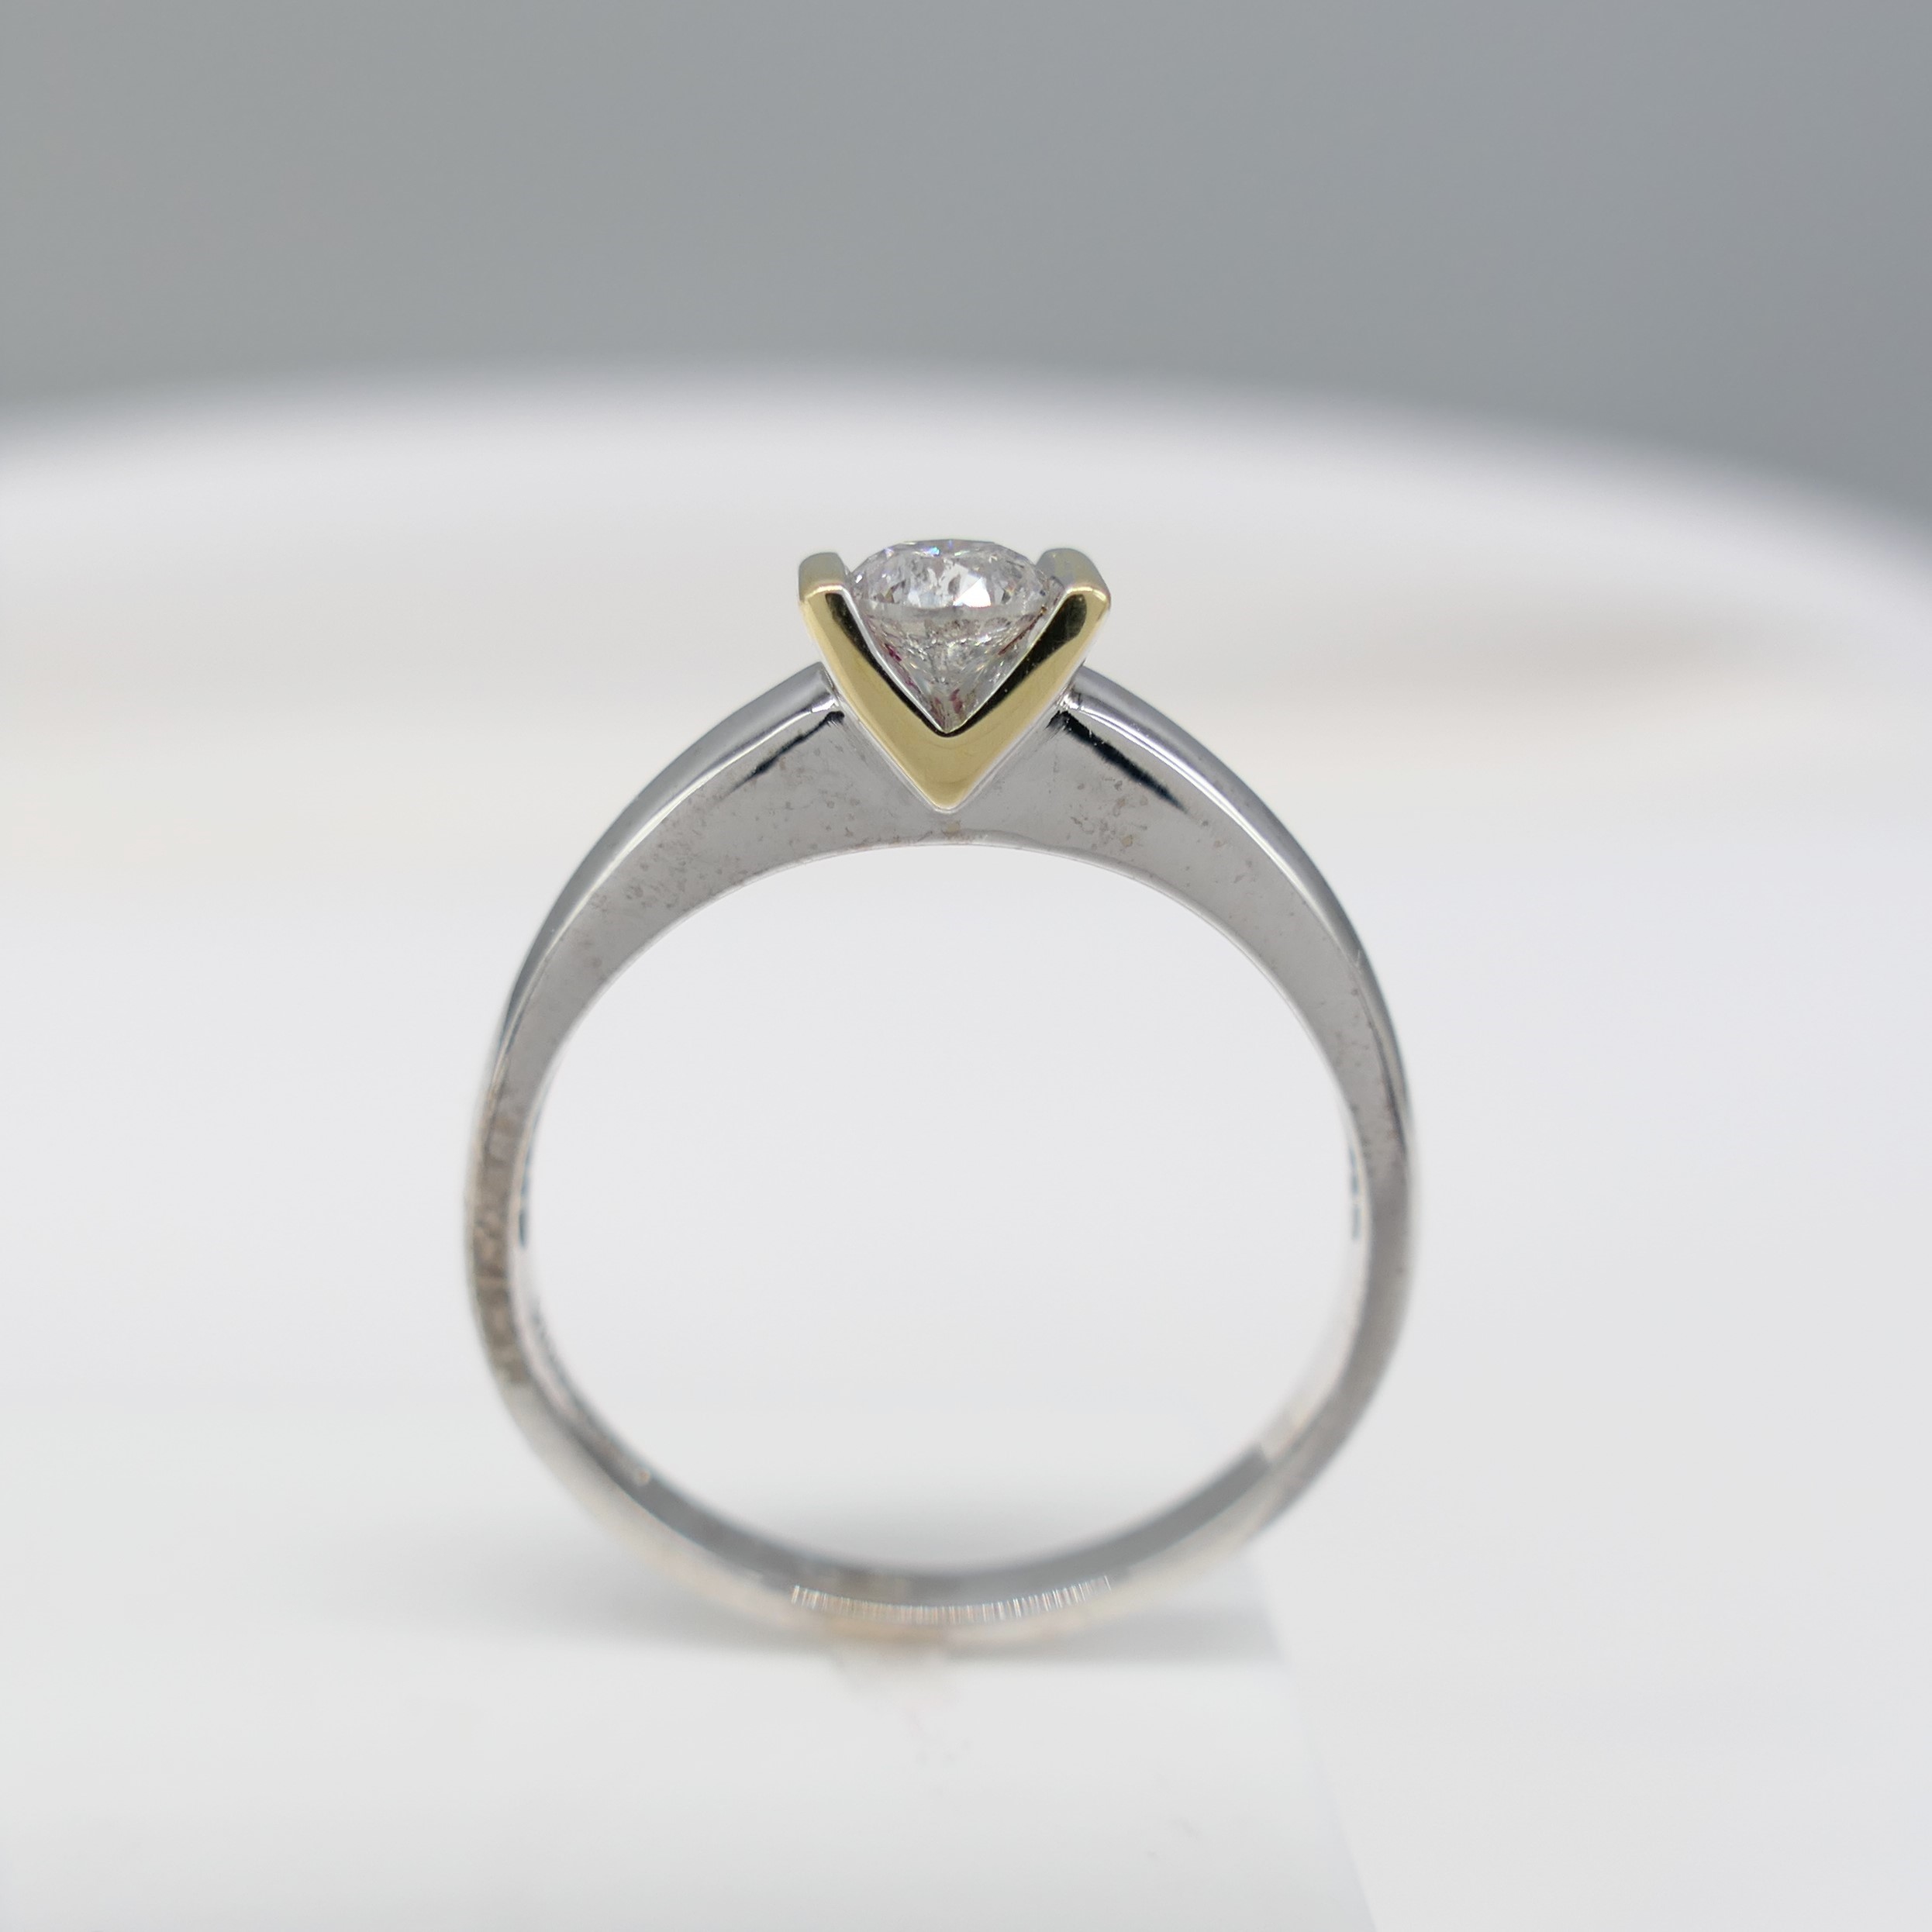 Contemporary 0.33 Carat Diamond Solitaire Ring In White and Yellow Gold, With Certificate - Image 6 of 6